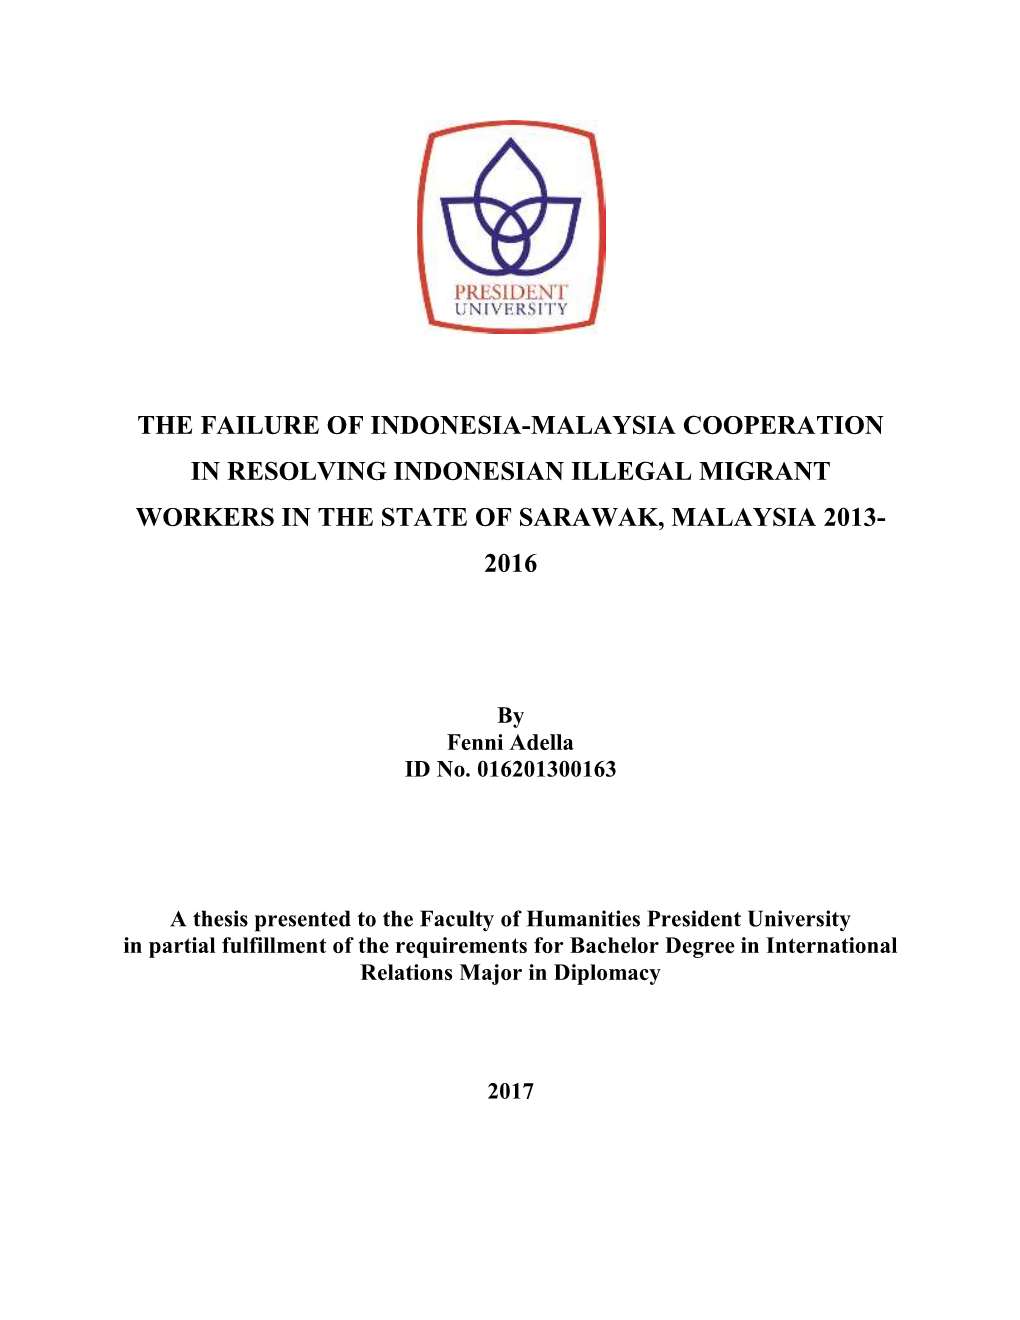 The Failure of Indonesia-Malaysia Cooperation in Resolving Indonesian Illegal Migrant Workers in the State of Sarawak, Malaysia 2013- 2016